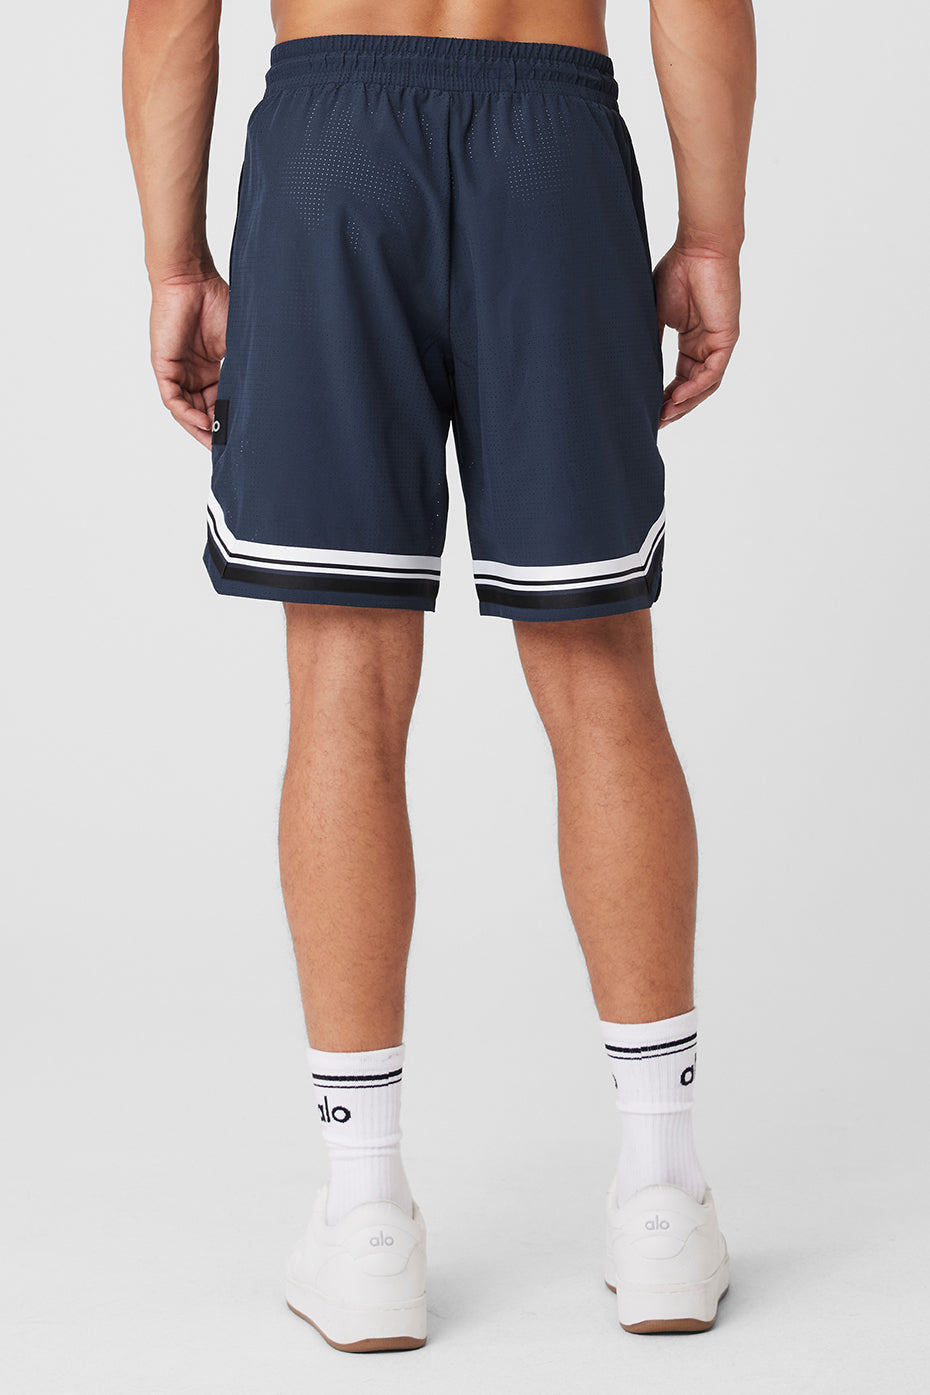 9' Traction Arena Short - Navy